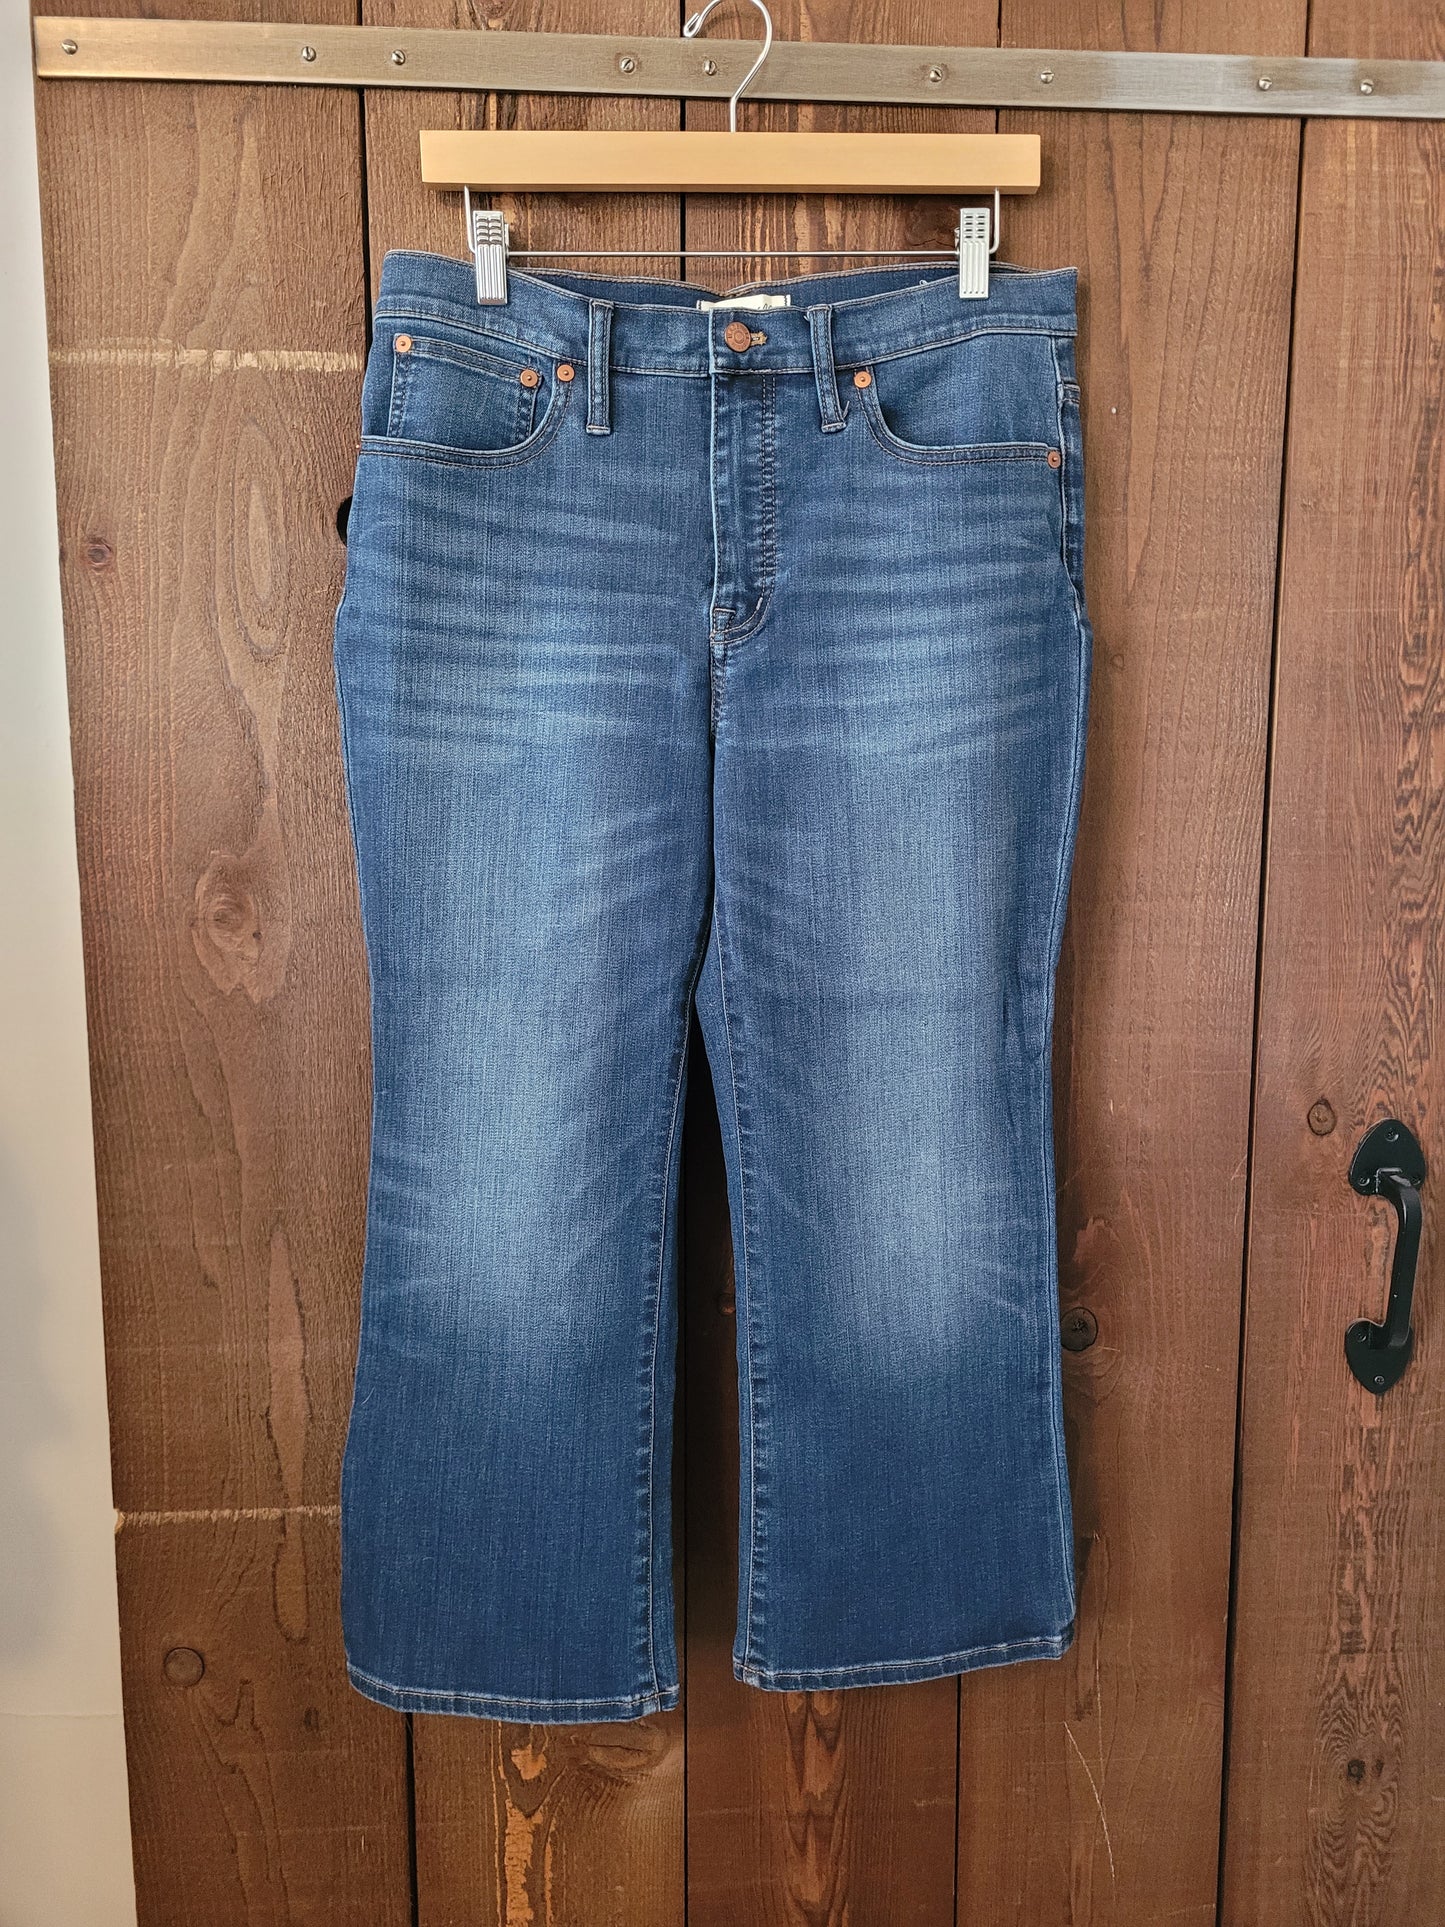 Madewell Women's Cali Demi-Boot Jeans Size 31P